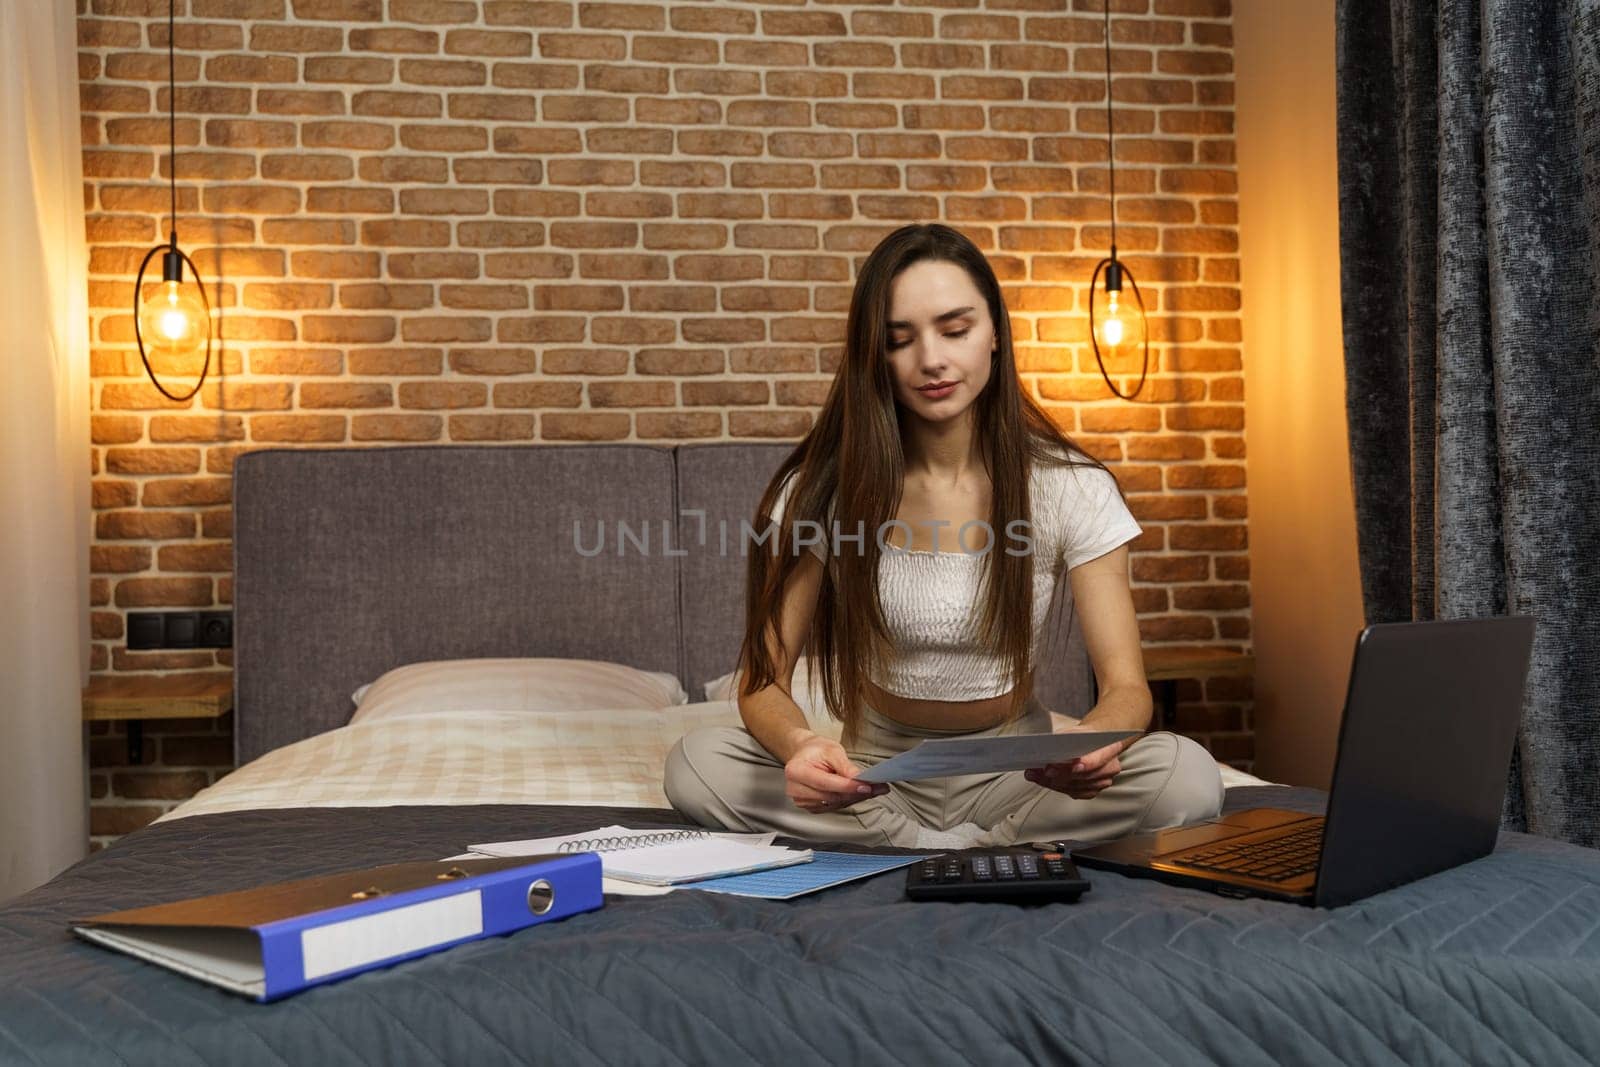 A young woman sits on a bed, looks at reporting documents, counts on a calculator and works on a laptop.